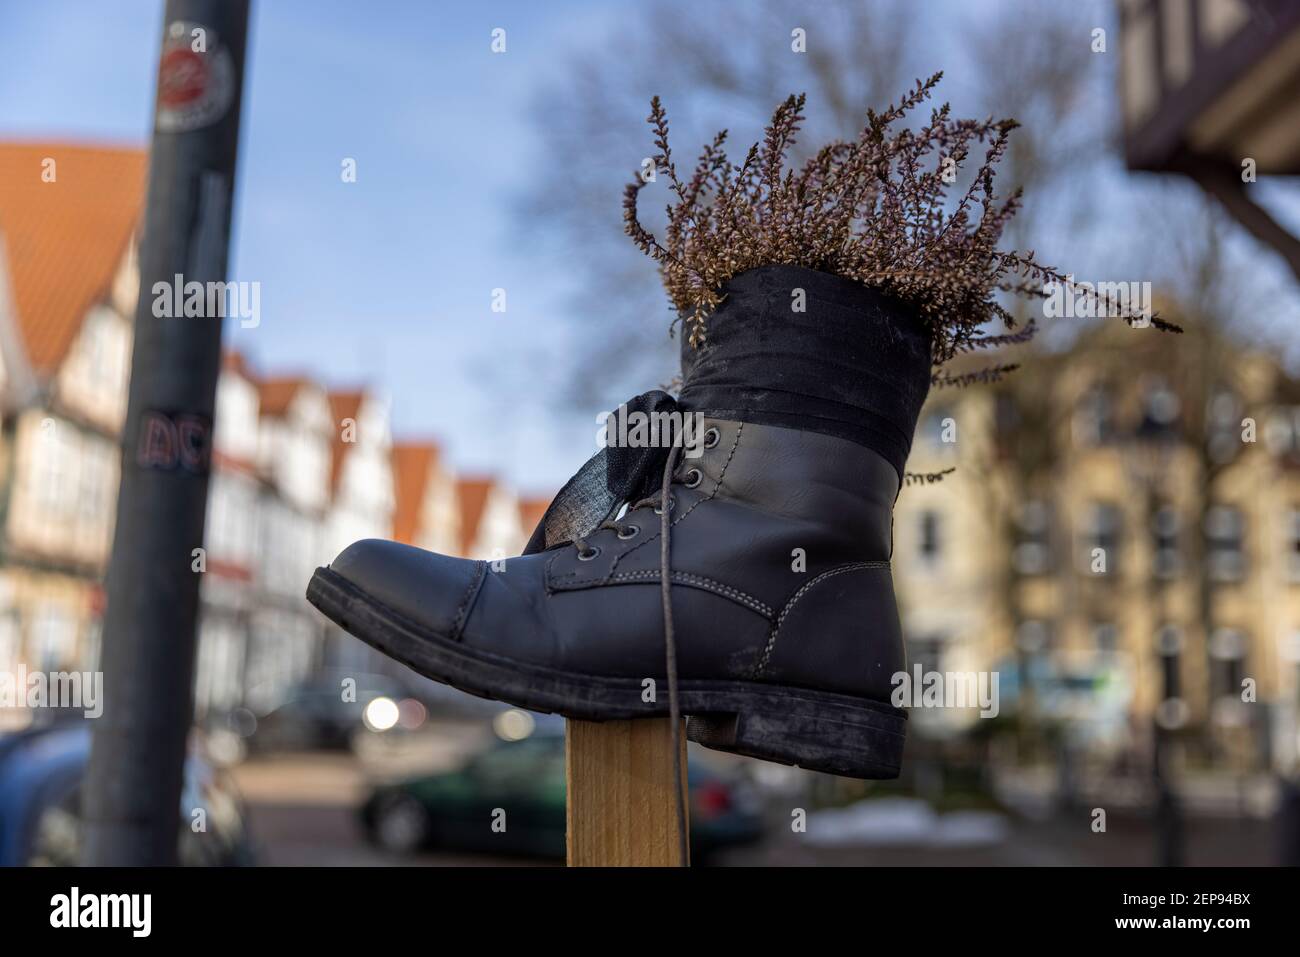 German city Celle is waking up after short winter. Flowers are planted in old shoes in old town. Stock Photo